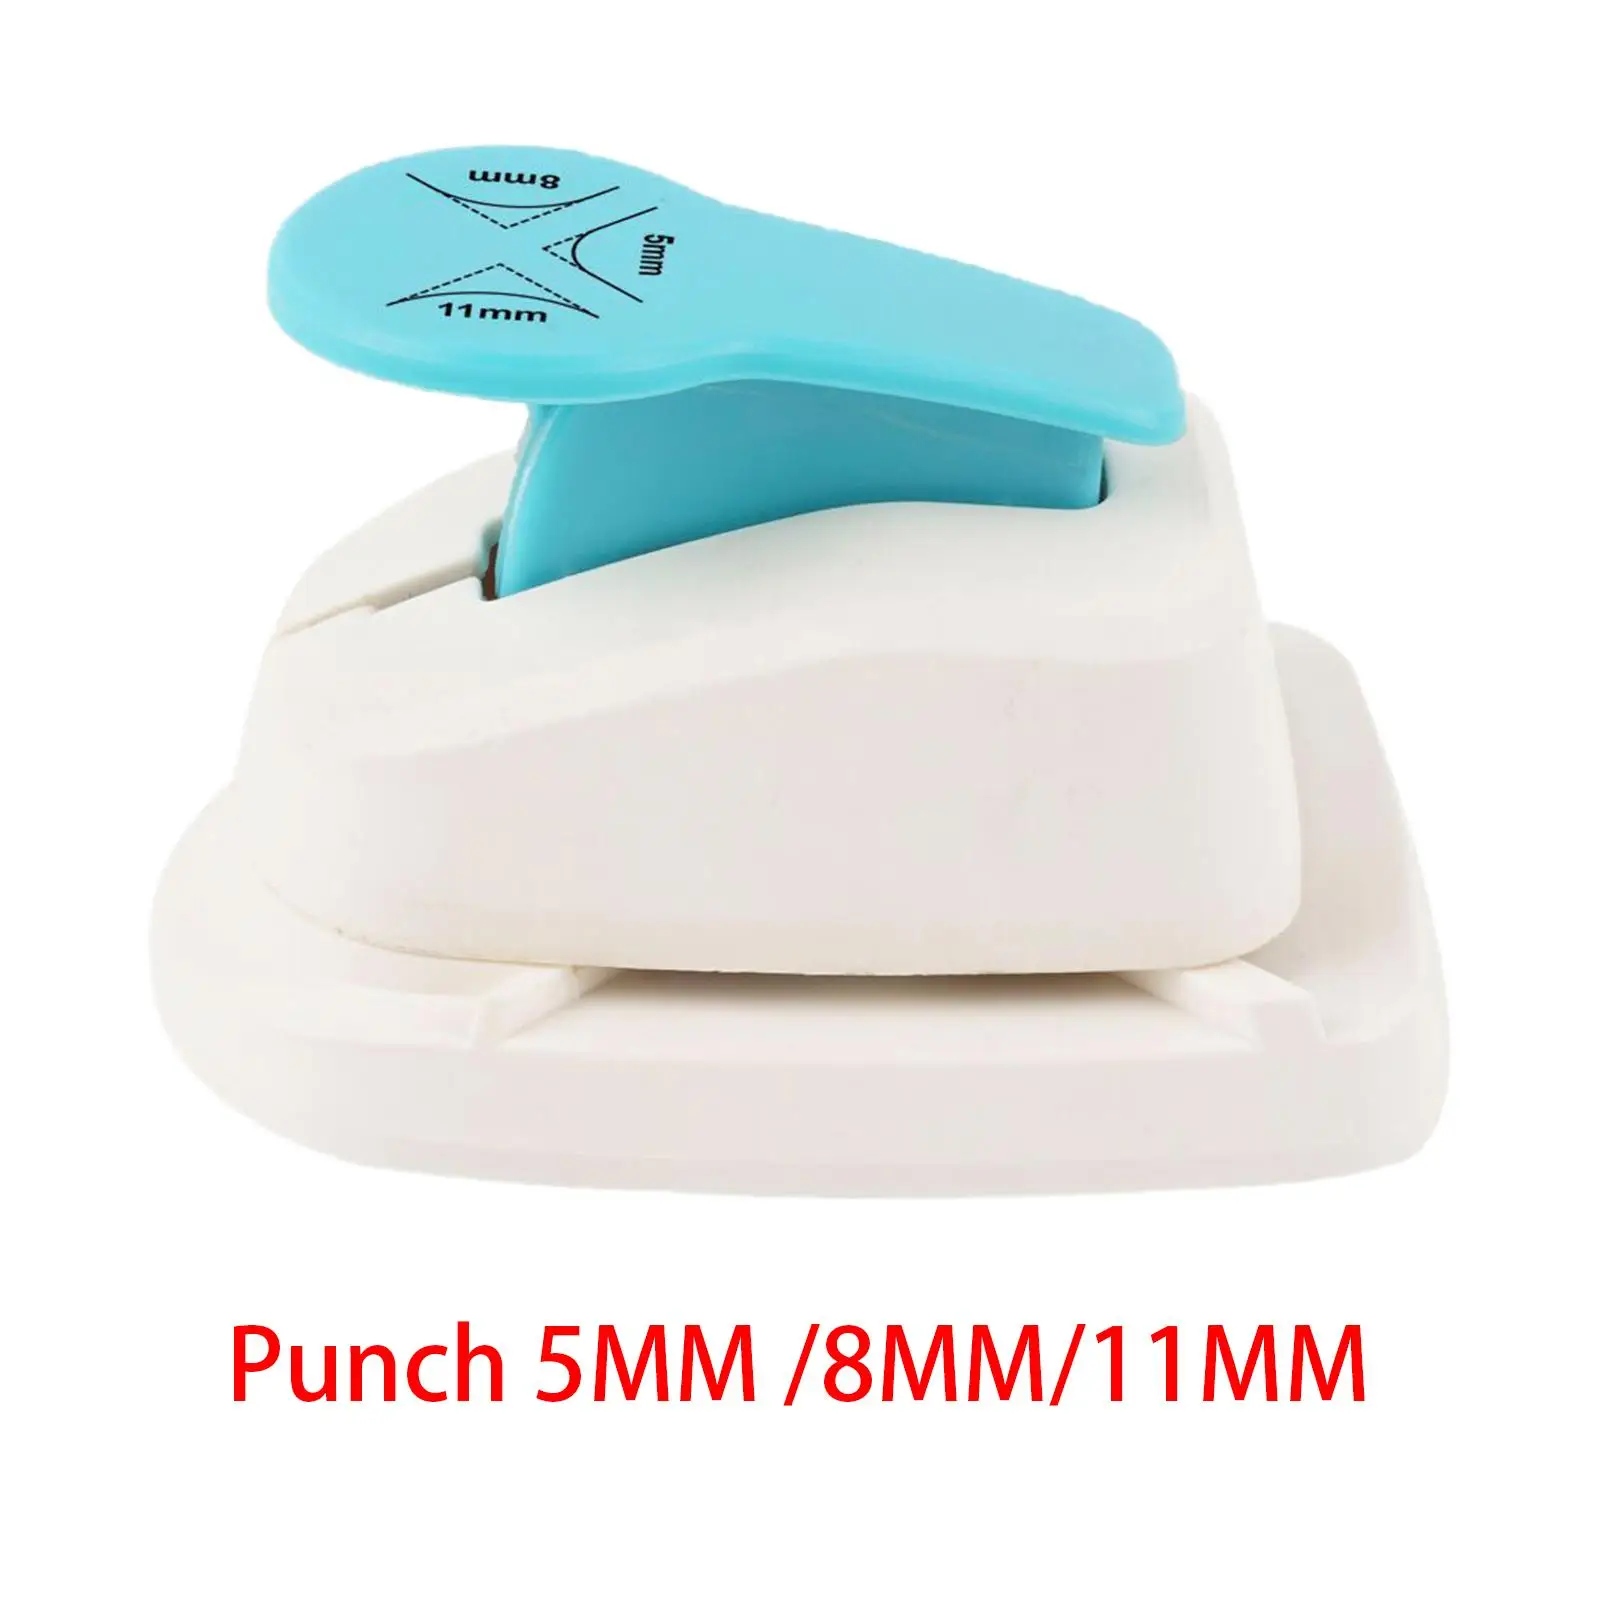 3 in 1 Corner Punch Hole Punch for Scrapbooking DIY Projects Birthday Cards